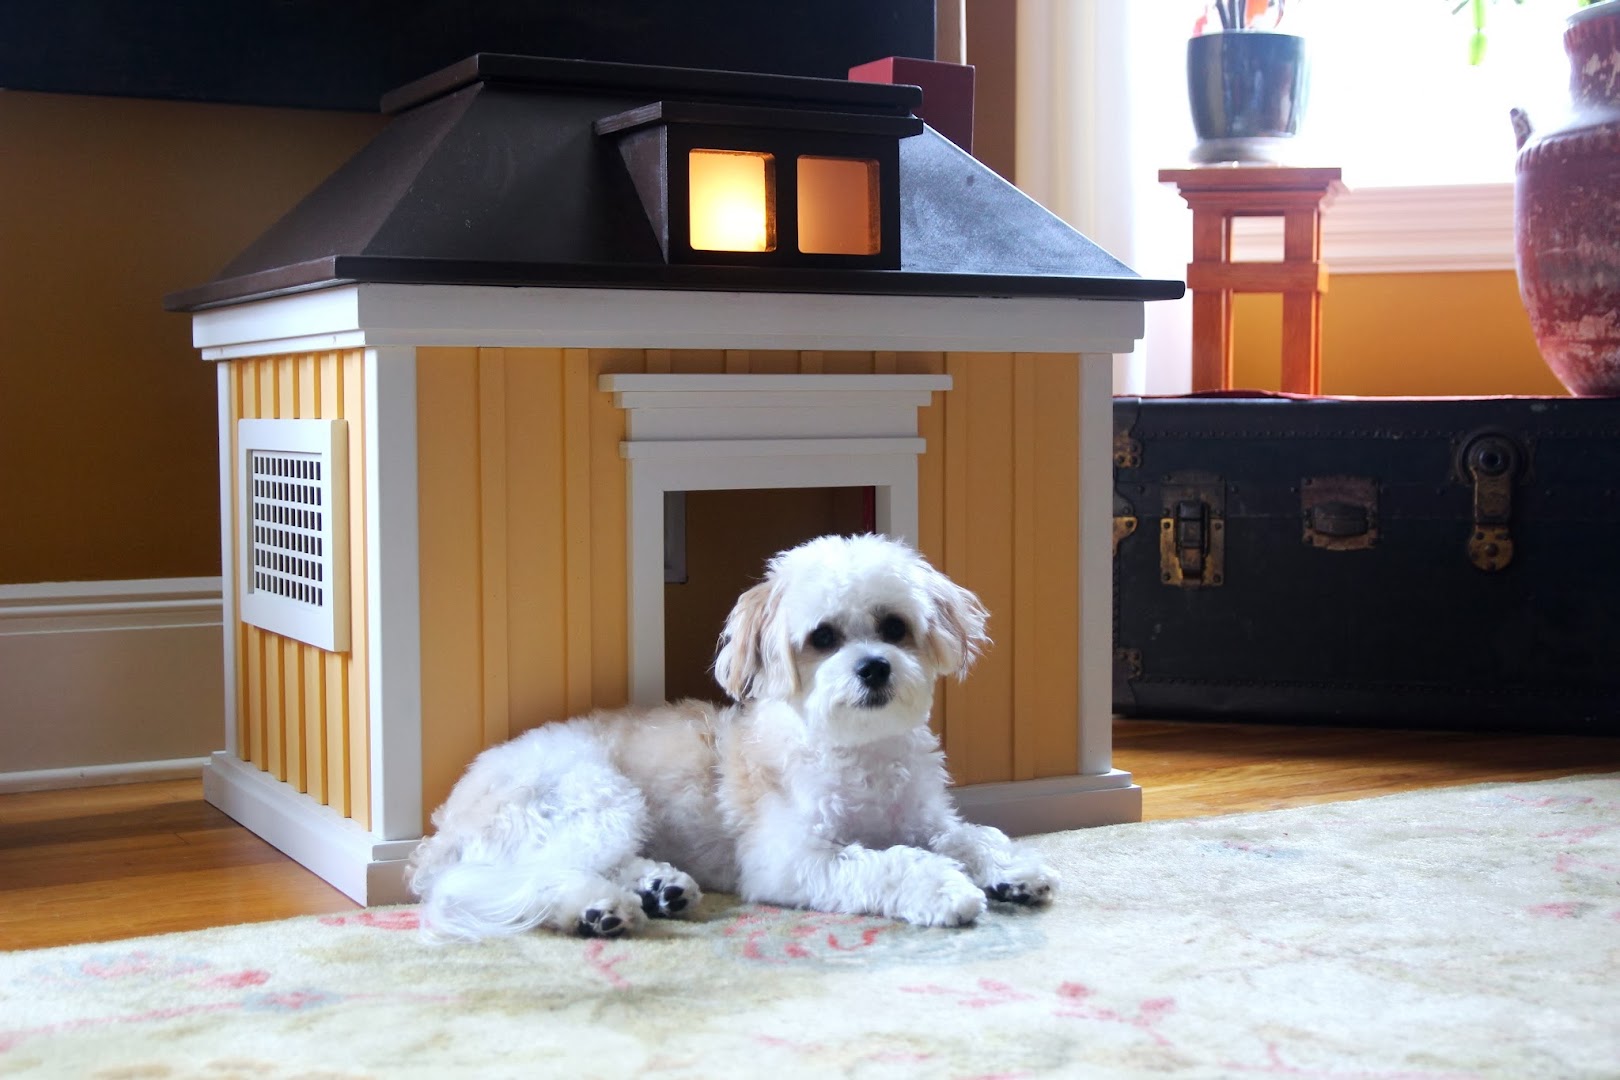 Dogmestic - Indoor Doghouses of Distinction